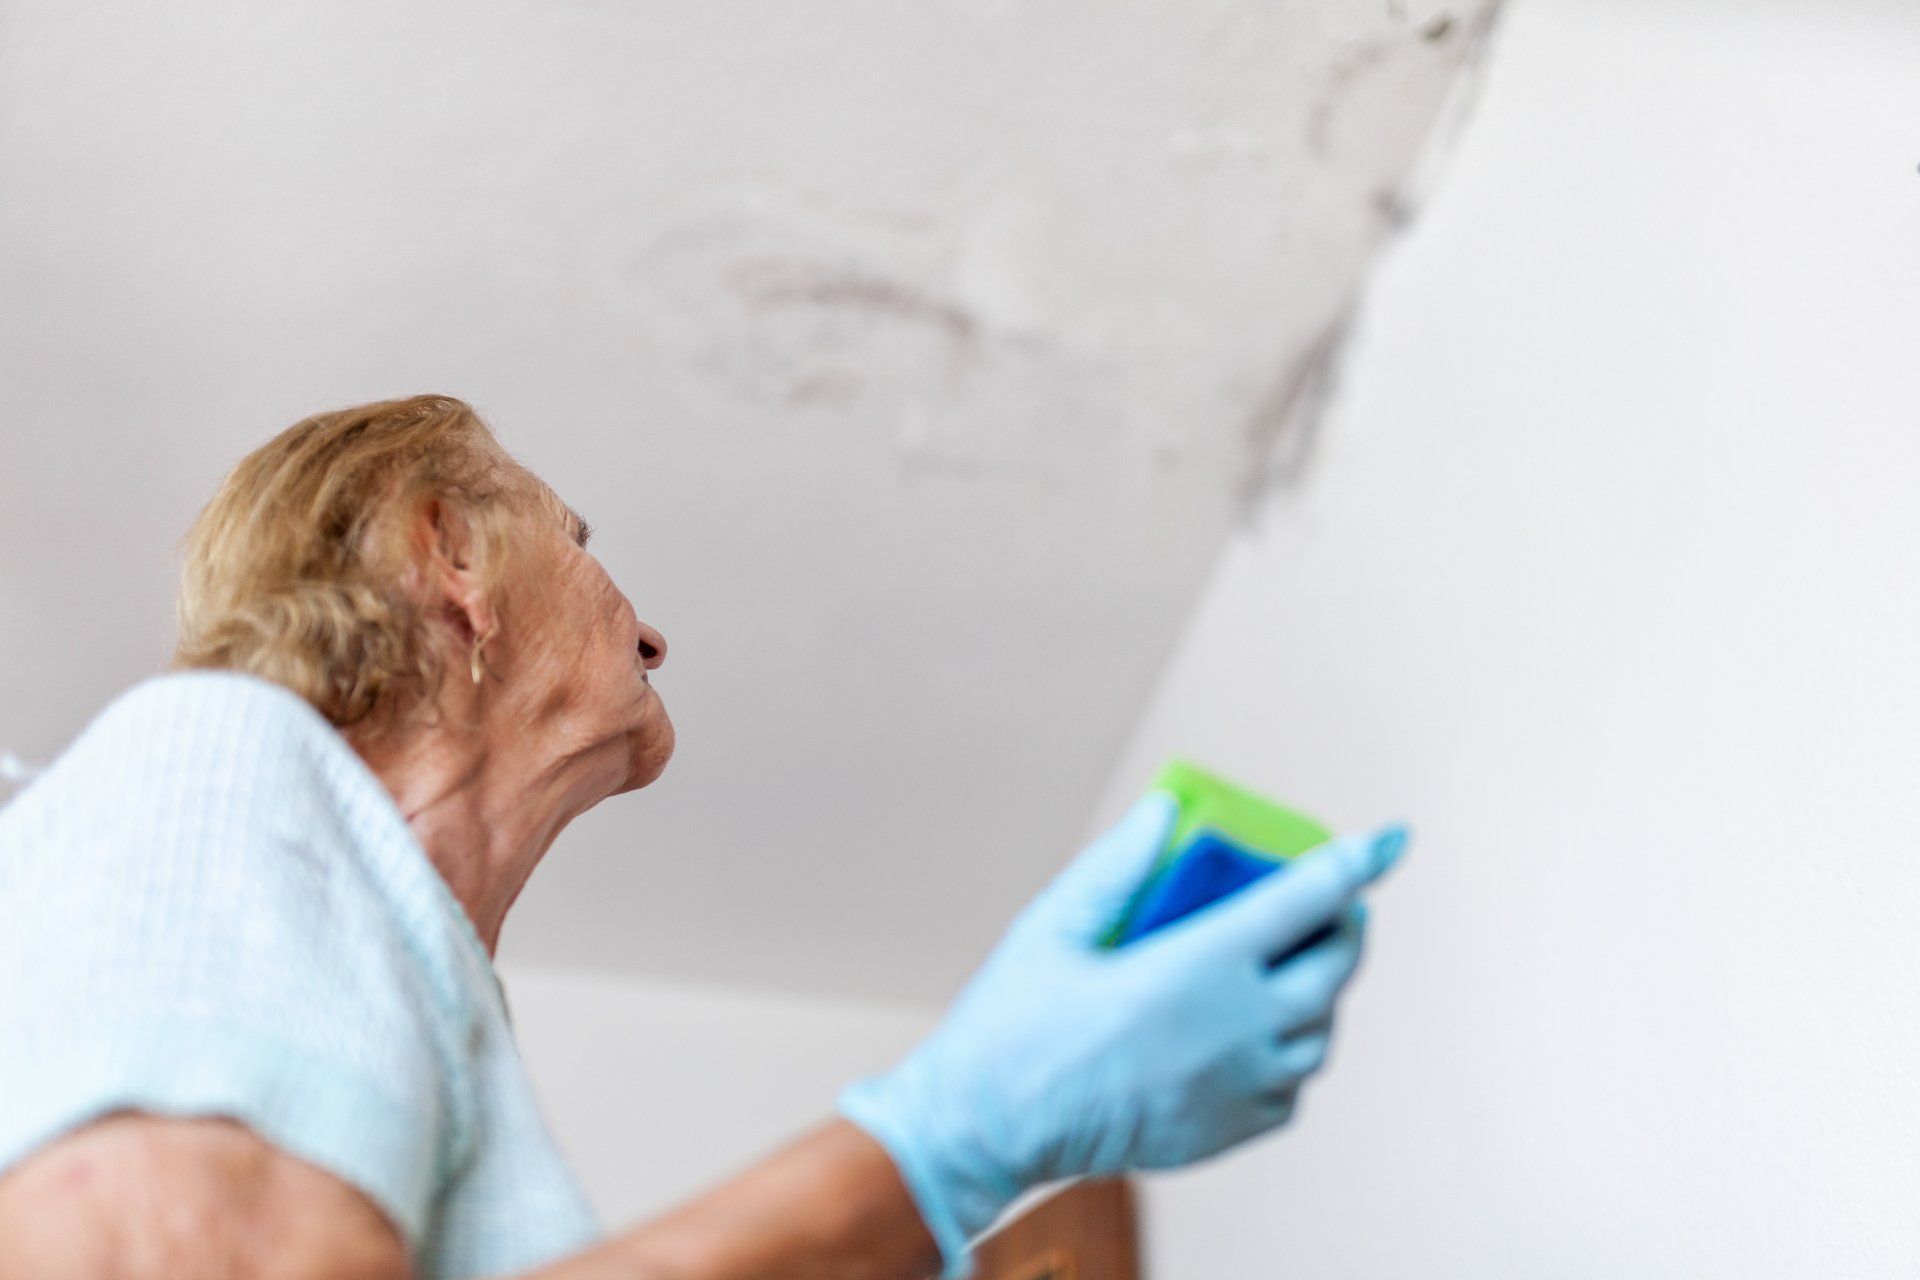 Senior cleaning up water damage mold from a wet wall.